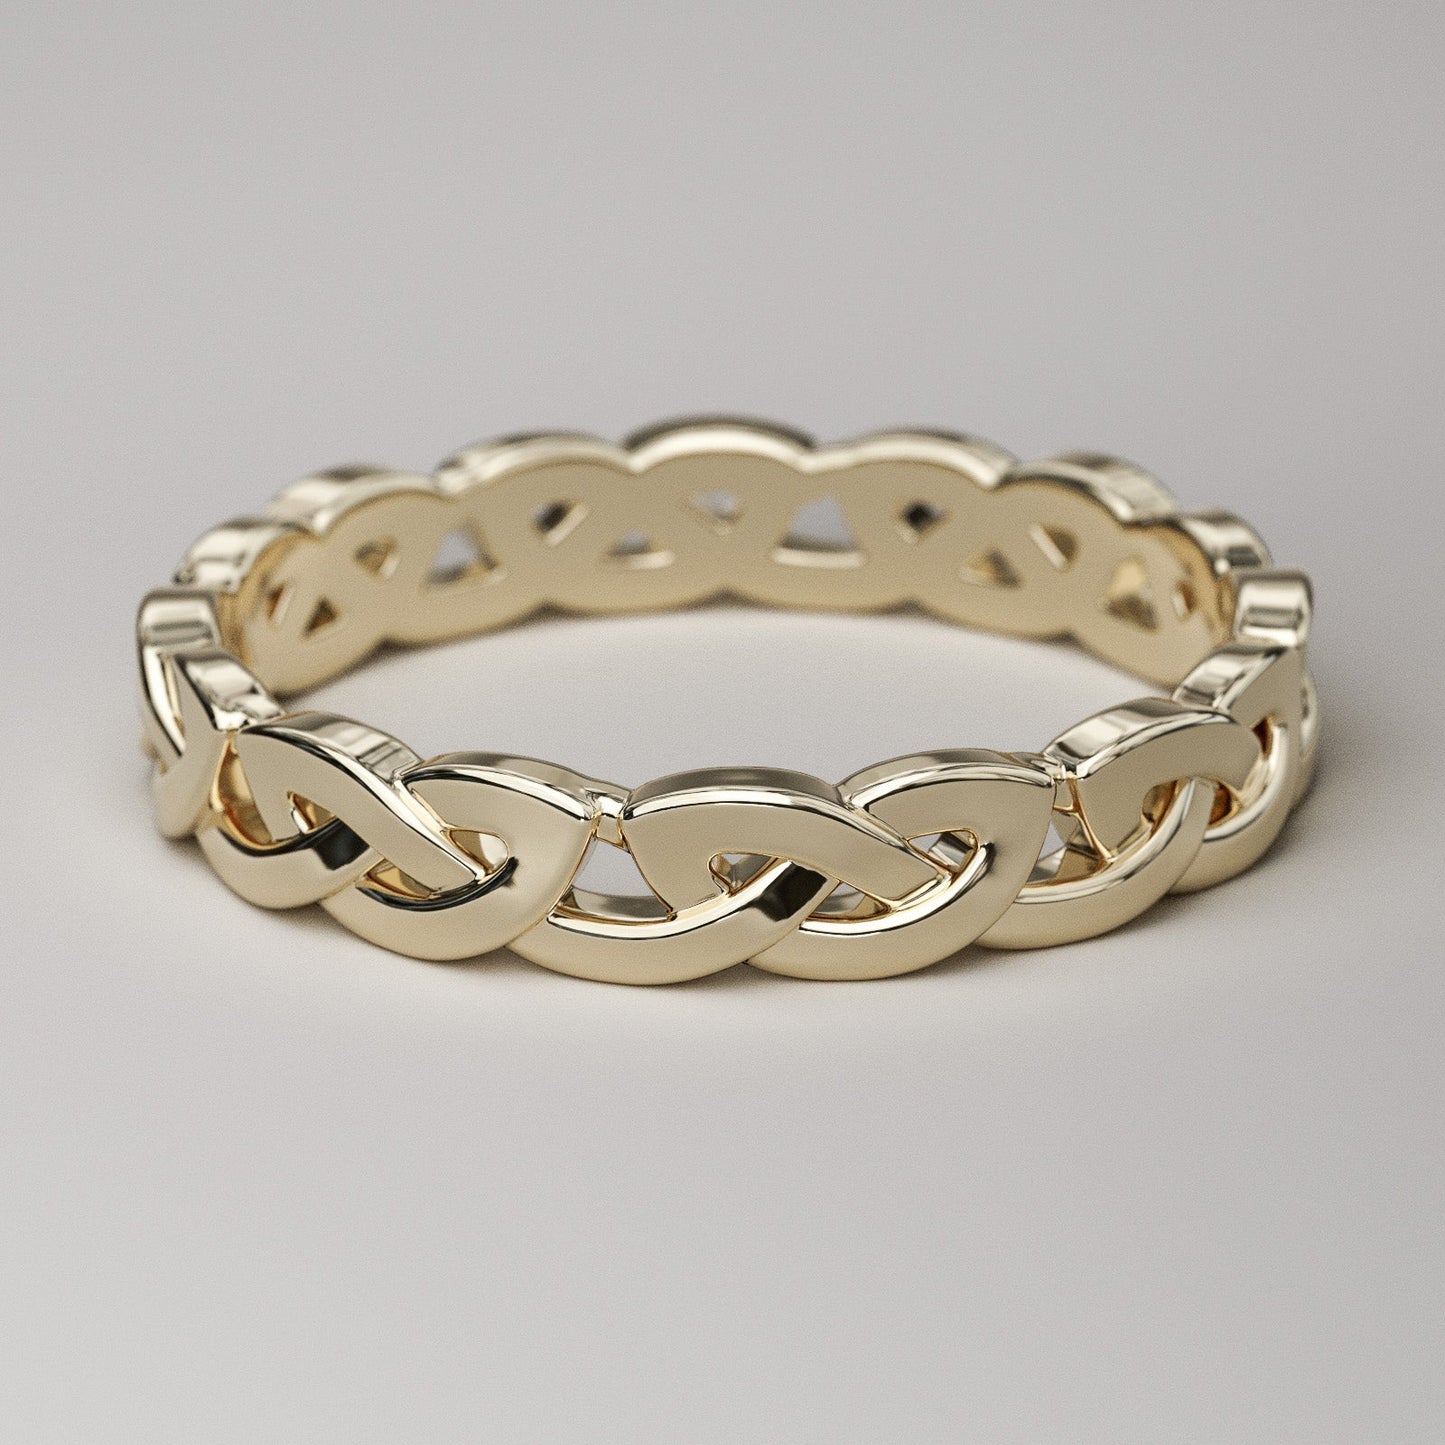 Unique 14k yellow gold wedding band - simple knot Celtic eternity ring